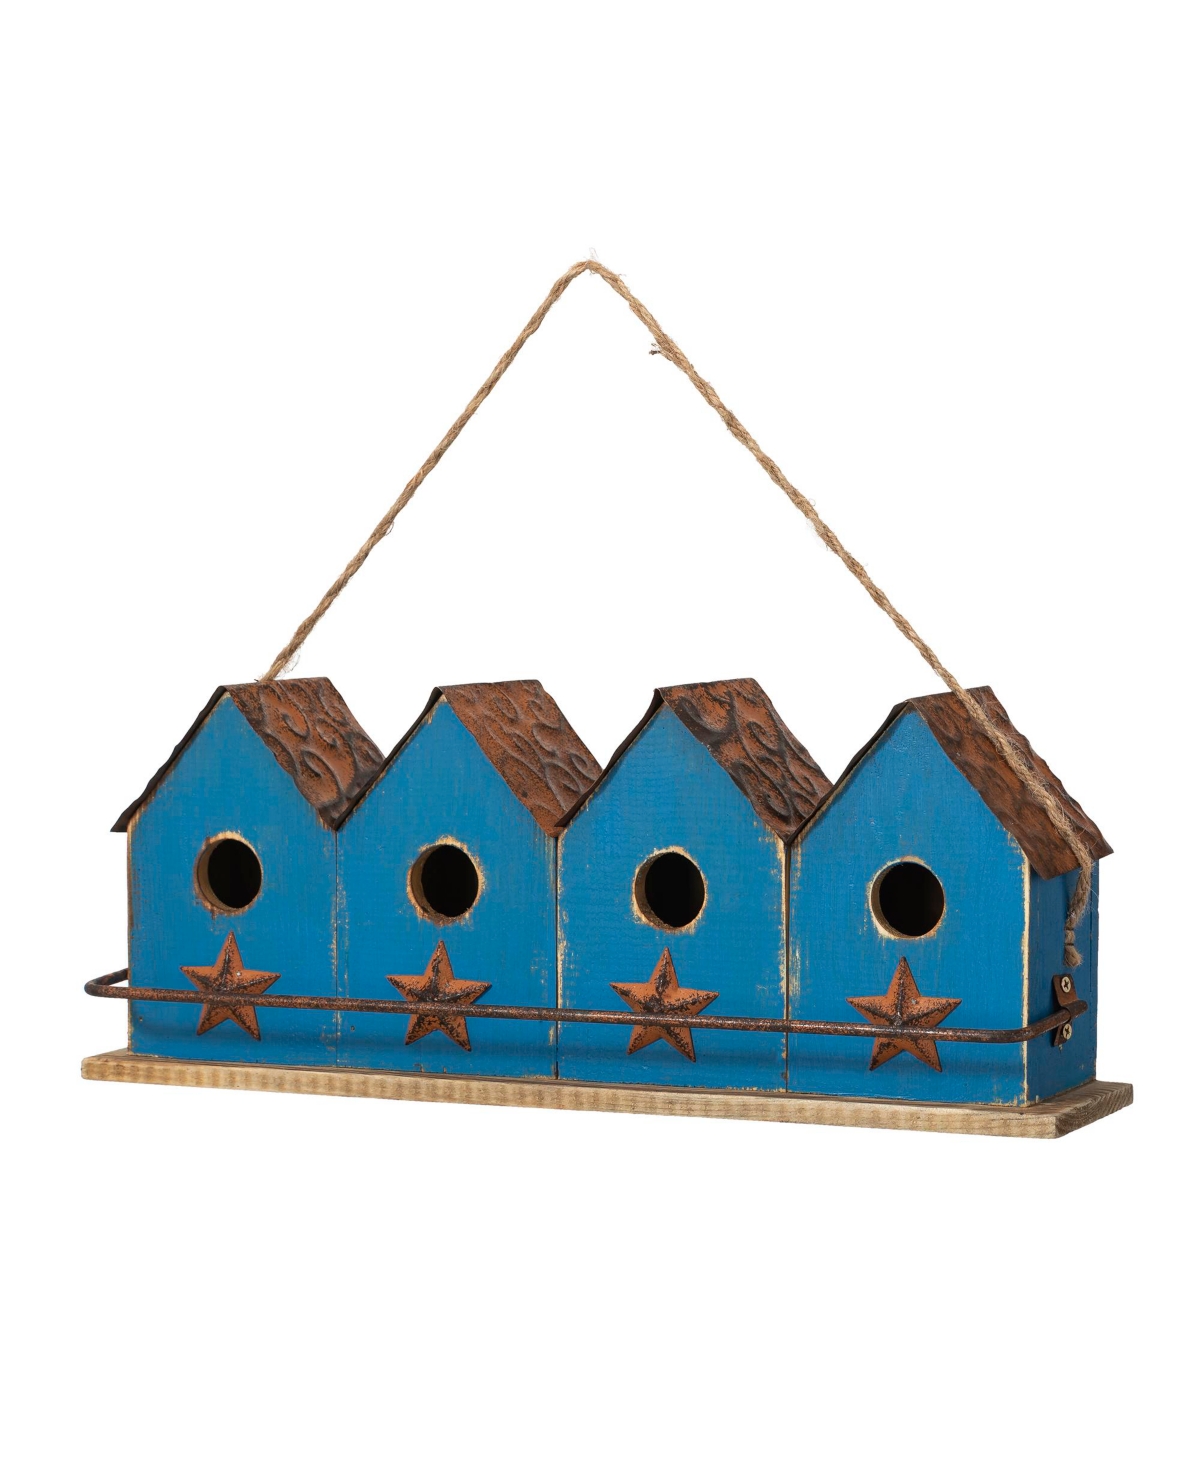 Glitzhome 17" L Retro-like Distressed Solid Wood Birdhouse With Perch In Blue